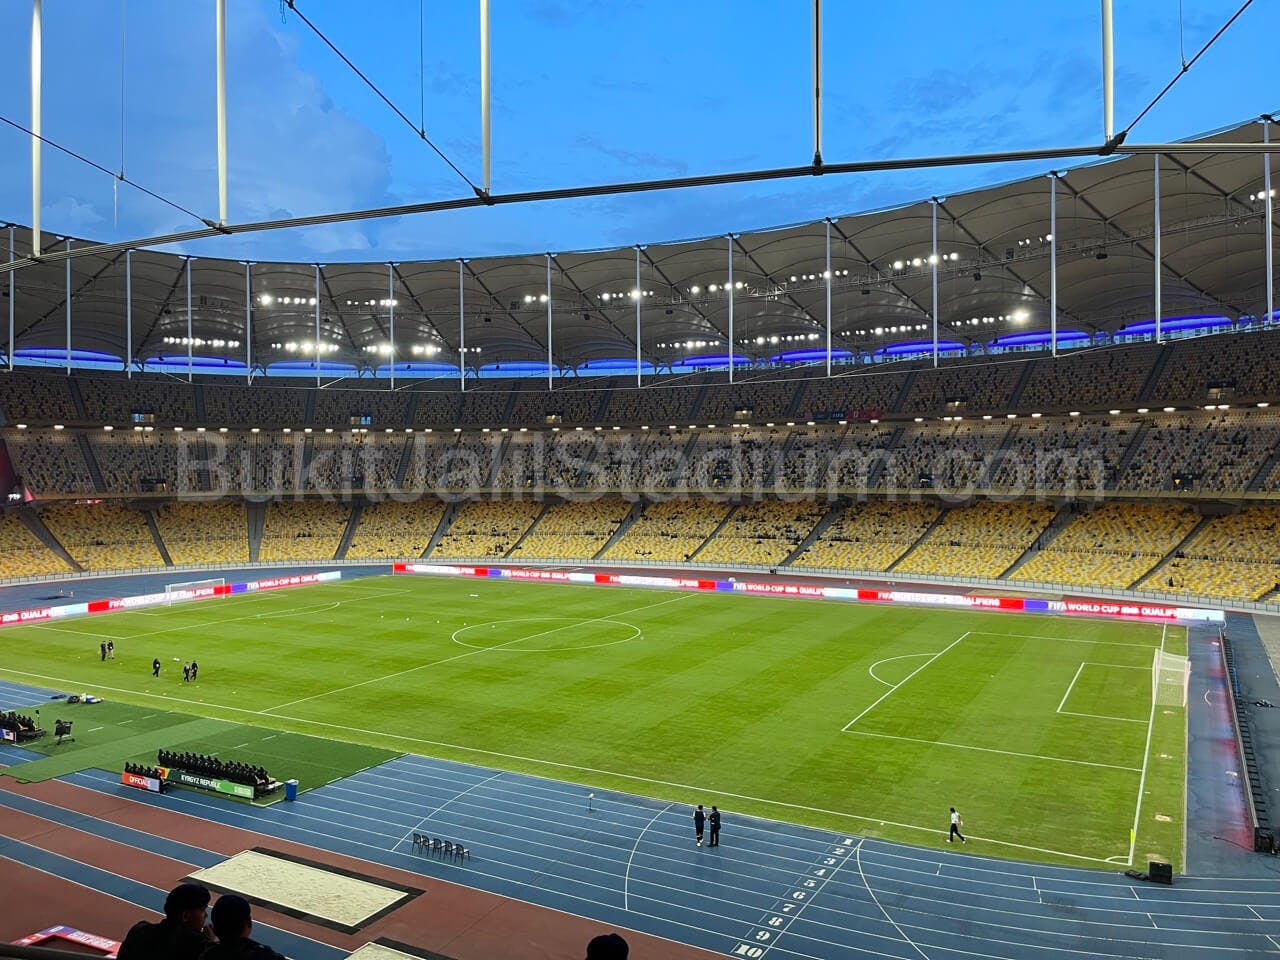 1x View of Bukit Jalil field from section 226 of Stadium Bukit Jalil.